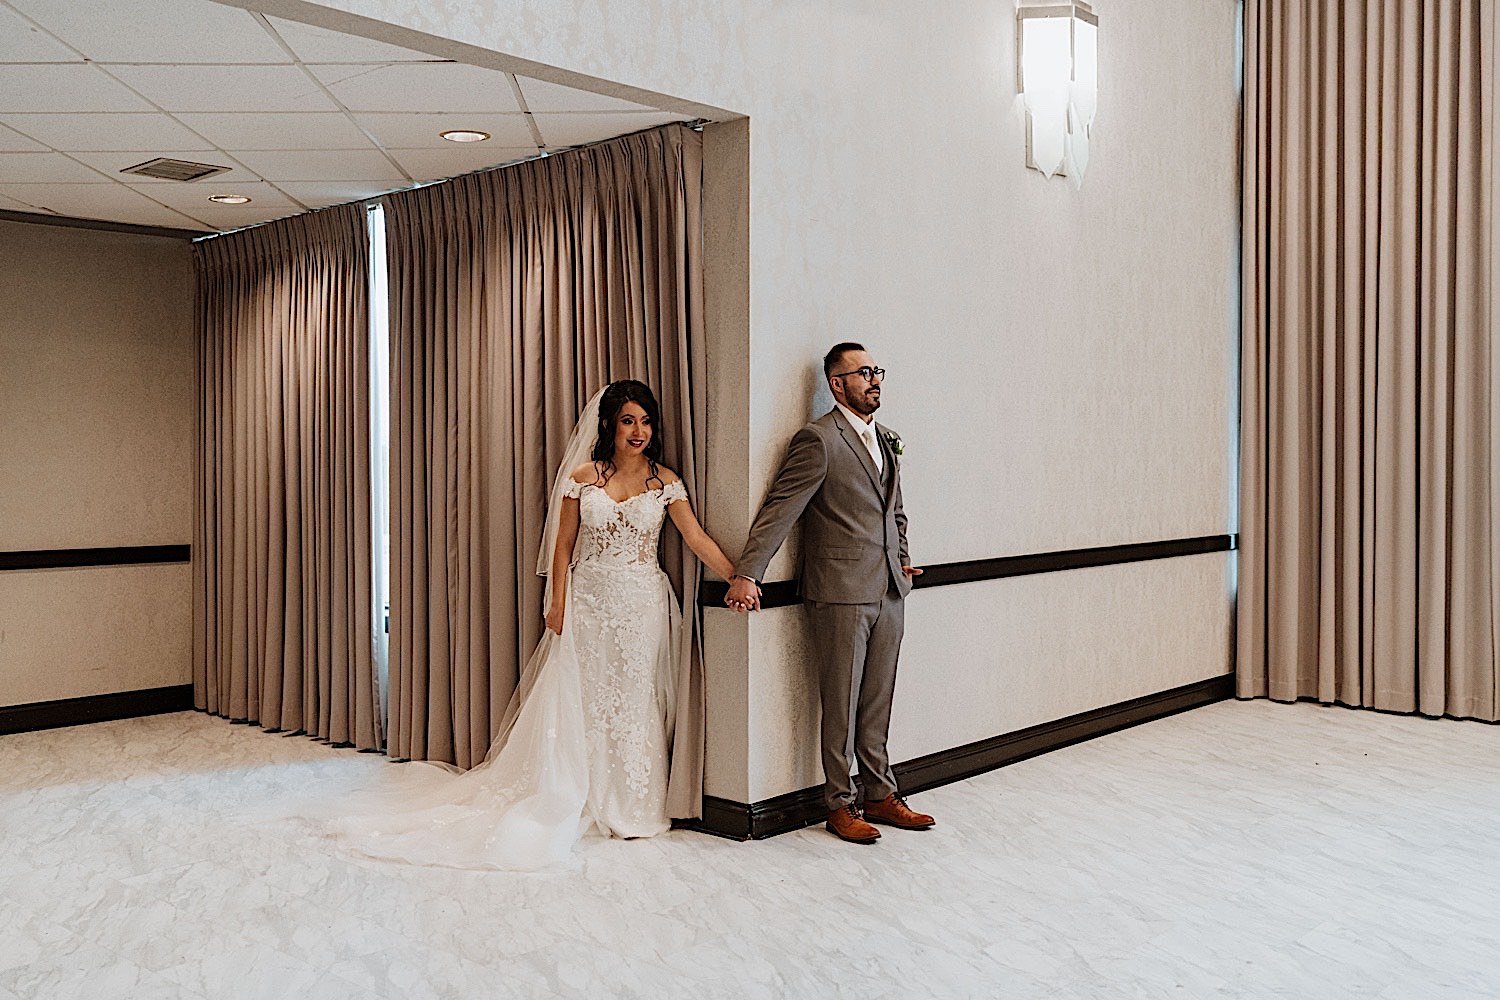 Bride and groom share first touch around a corner in their ballroom wedding venue